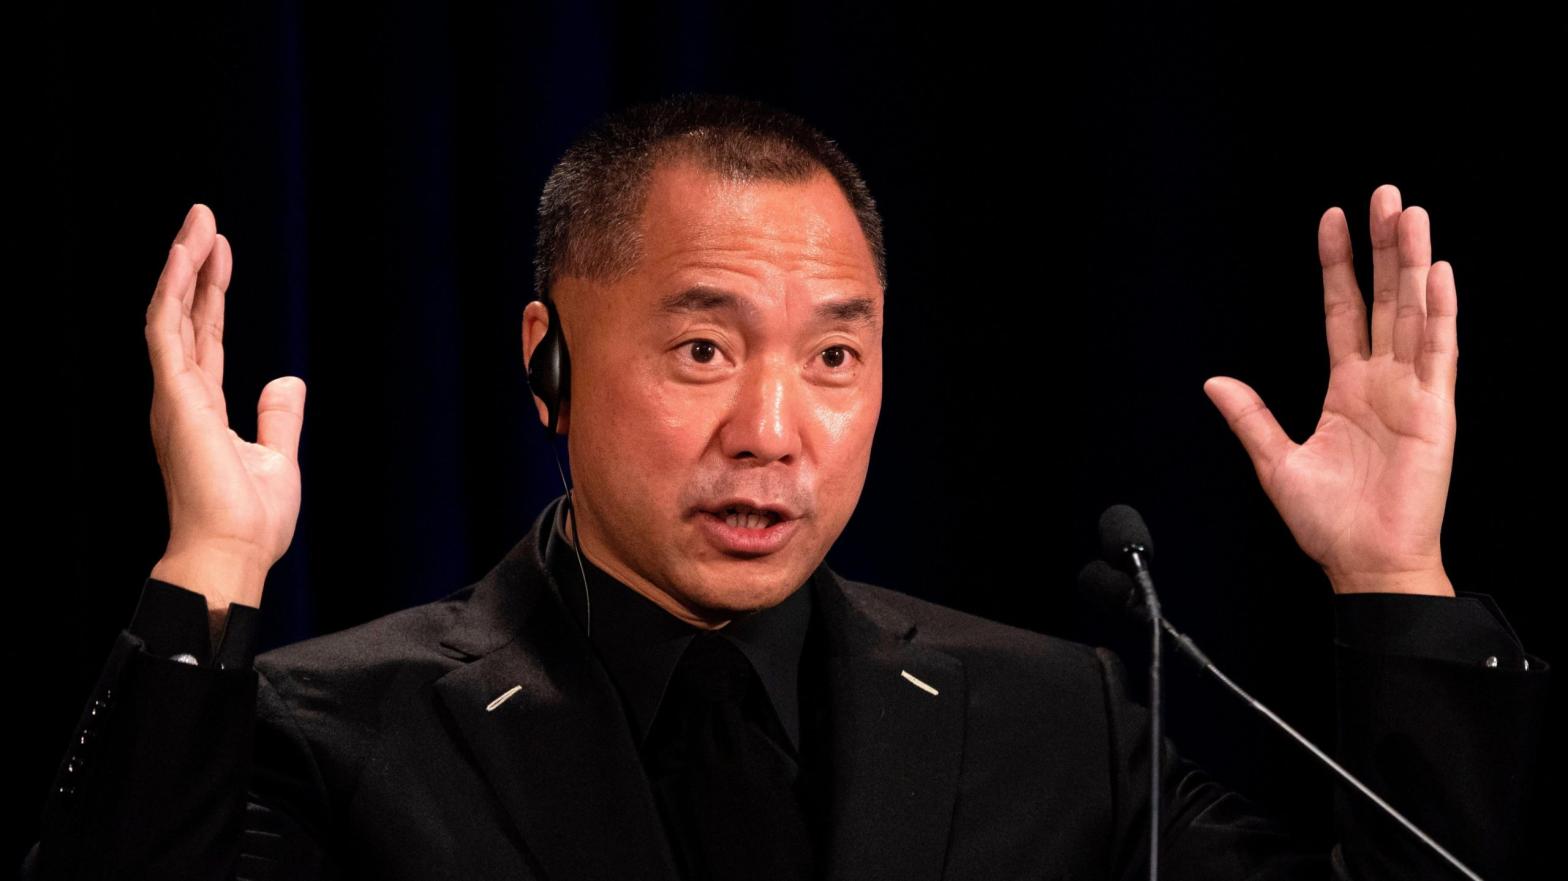 Guo Wengui, fugitive Chinese billionaire, seen here giving a news conference in November 2018 in New York. (Photo: Don Emmert / AFP, Getty Images)